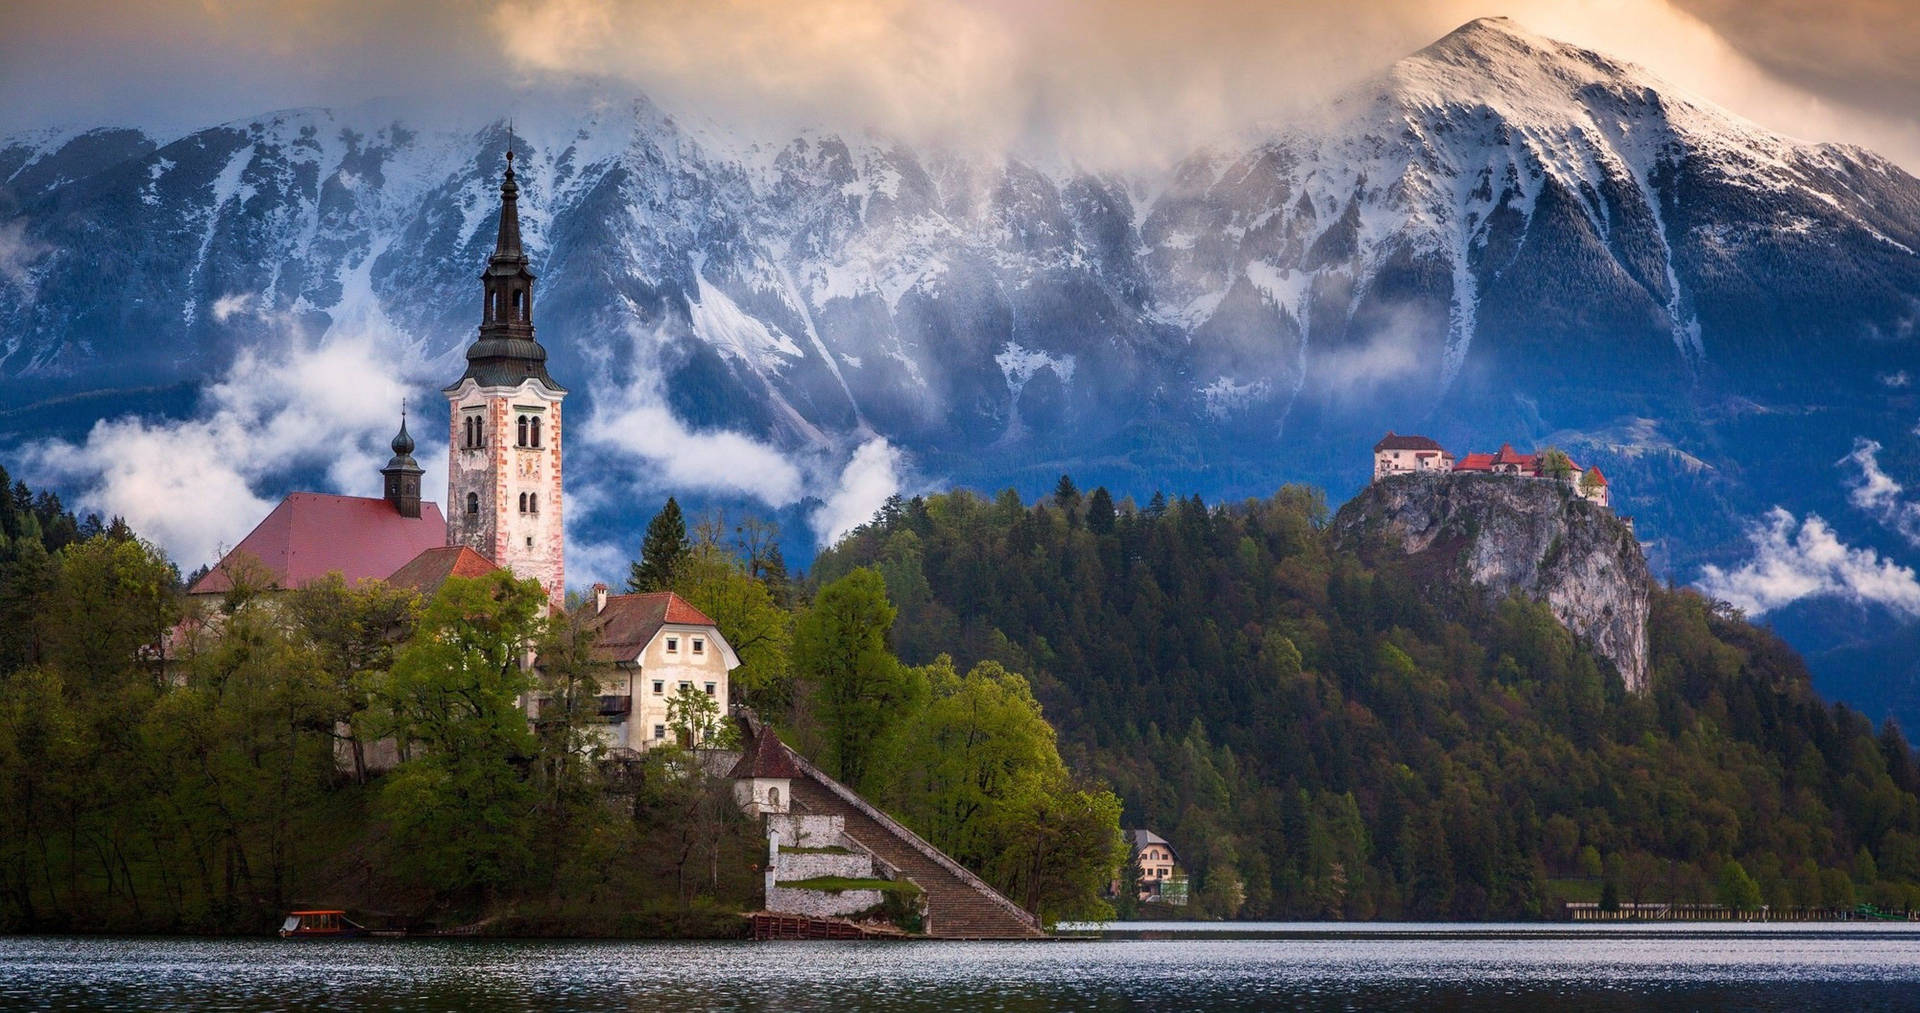 Caption: Bled Island On Lake Bled In Slovenia